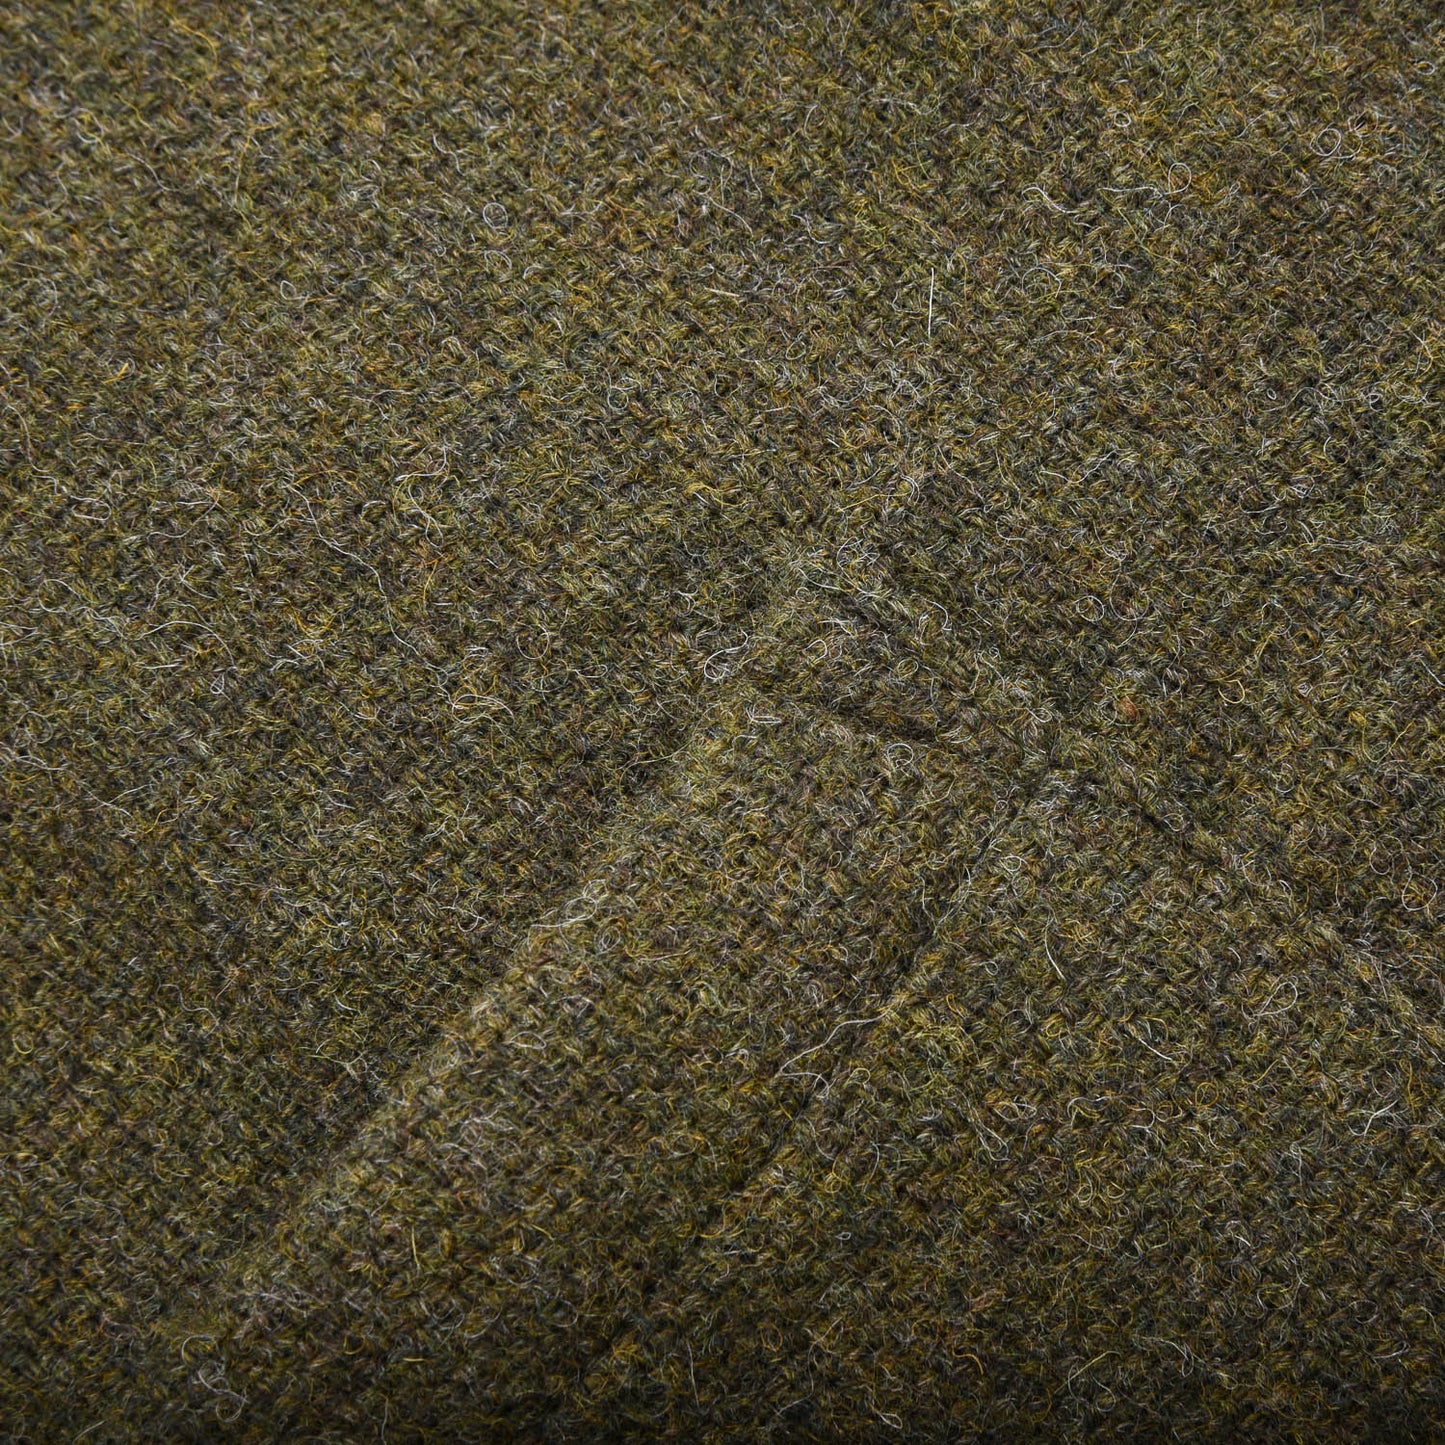 USED CAMO 'TISSERAND' CHORE JACKET - FOREST GREEN TWEED